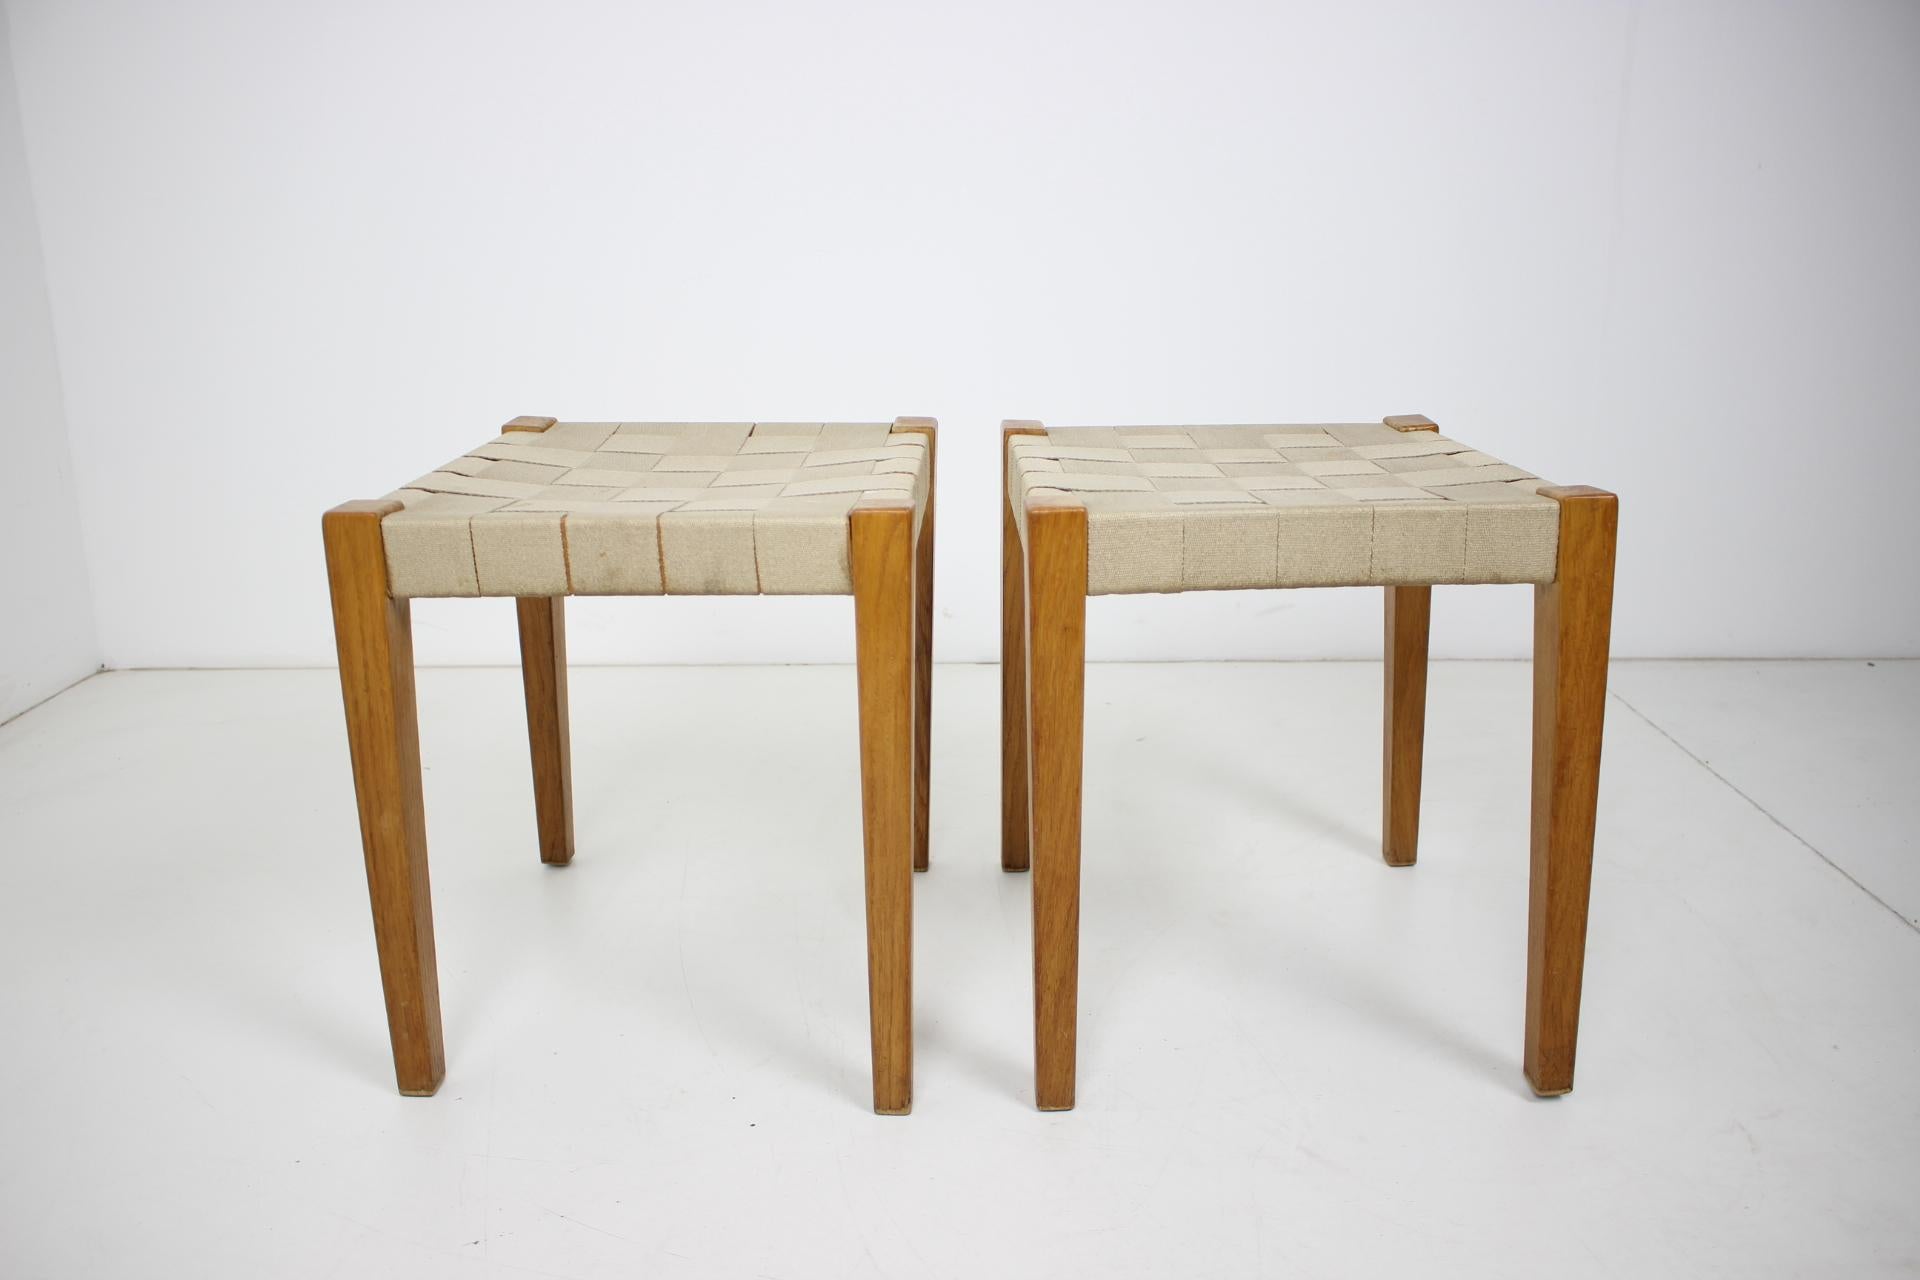 Czech Pair of Midcentury Stools or Tabourets, 1950s